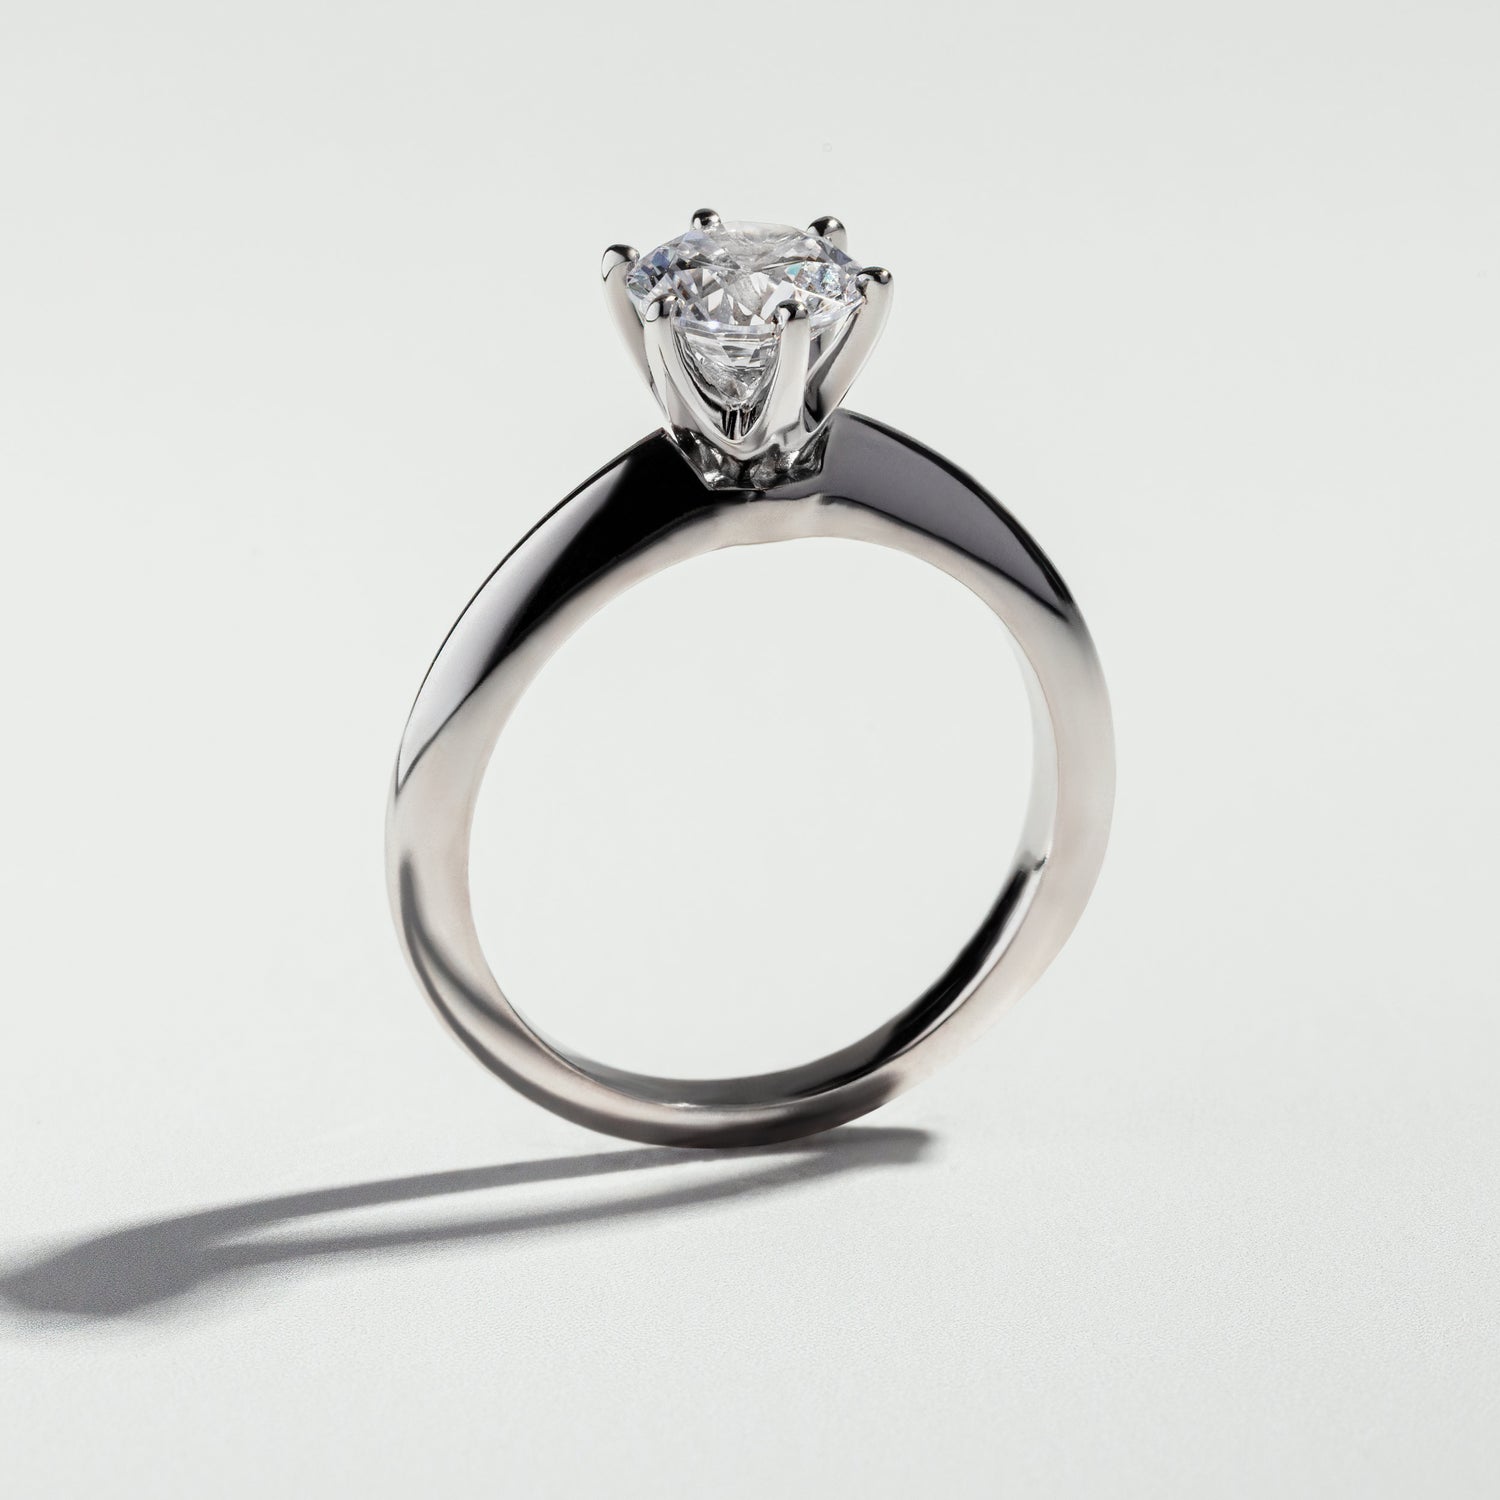 The Round Cut 6 Prongs Diamond Solitaire Ring